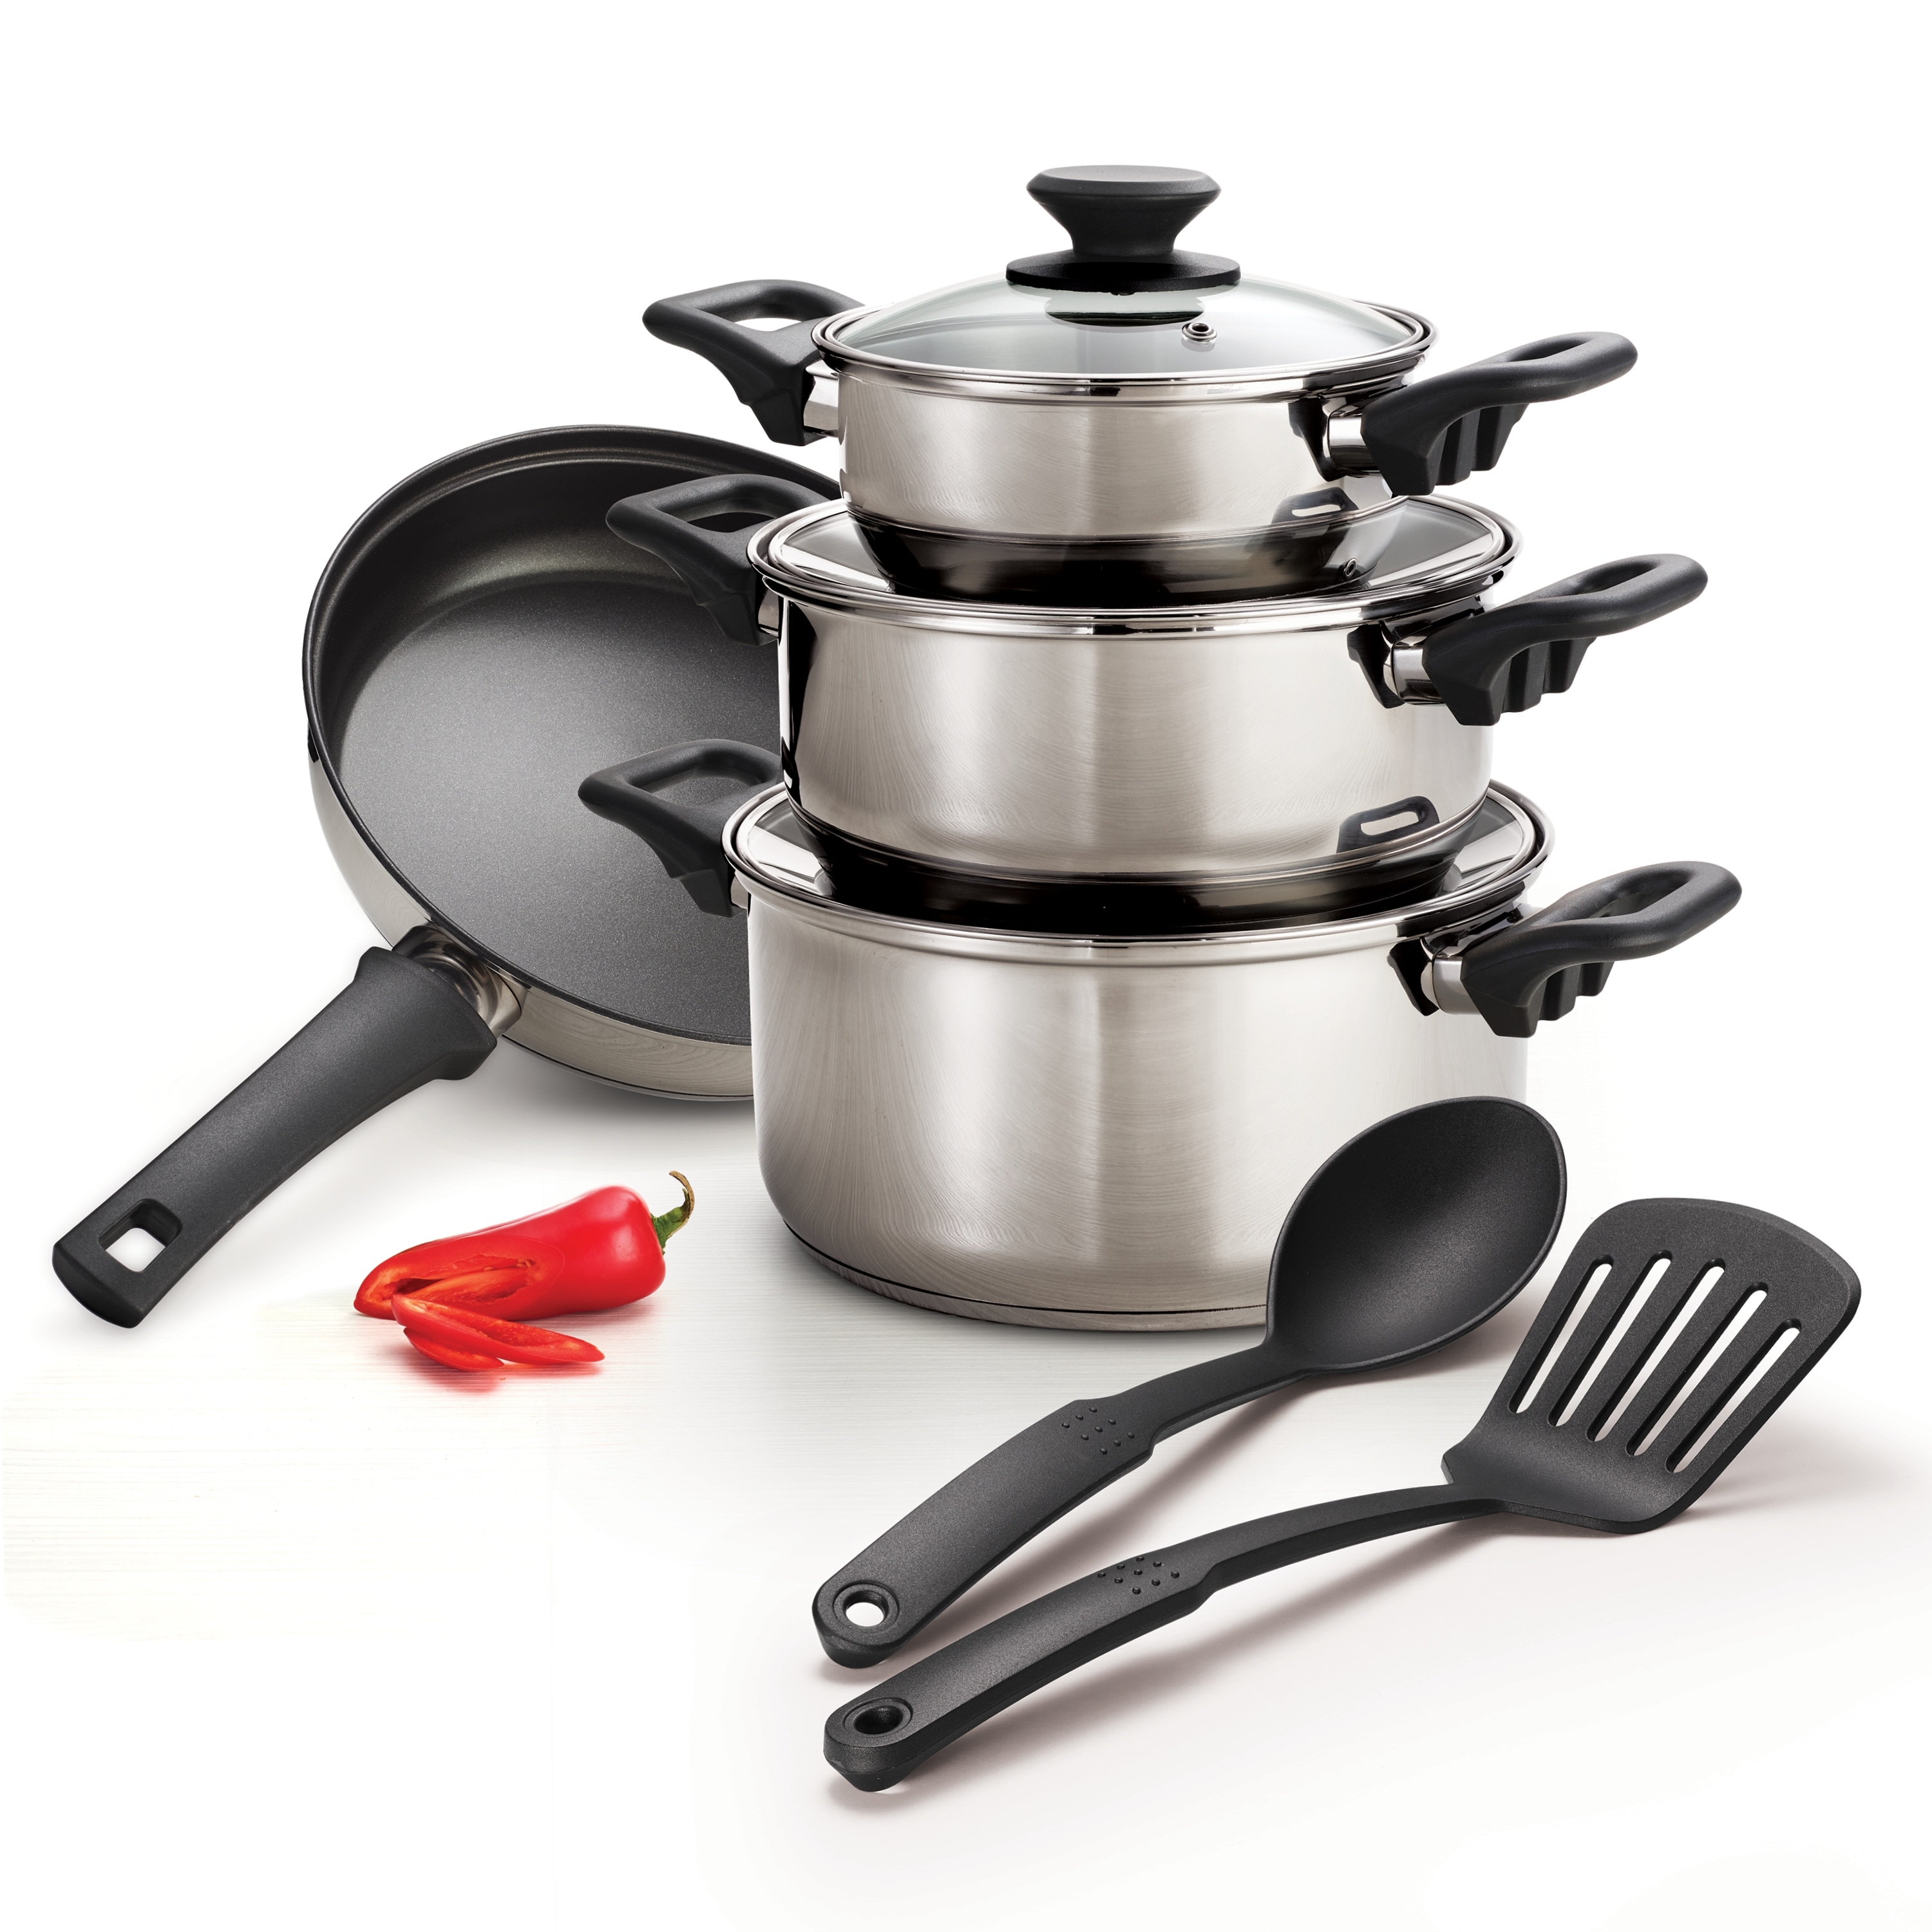 https://ak1.ostkcdn.com/images/products/is/images/direct/90349ebea21b0e704ccb04405a5290acf5041943/Tramontina-9-PC-Cookware-Set---Stainless-Steel---Tri-Ply-Base.jpg